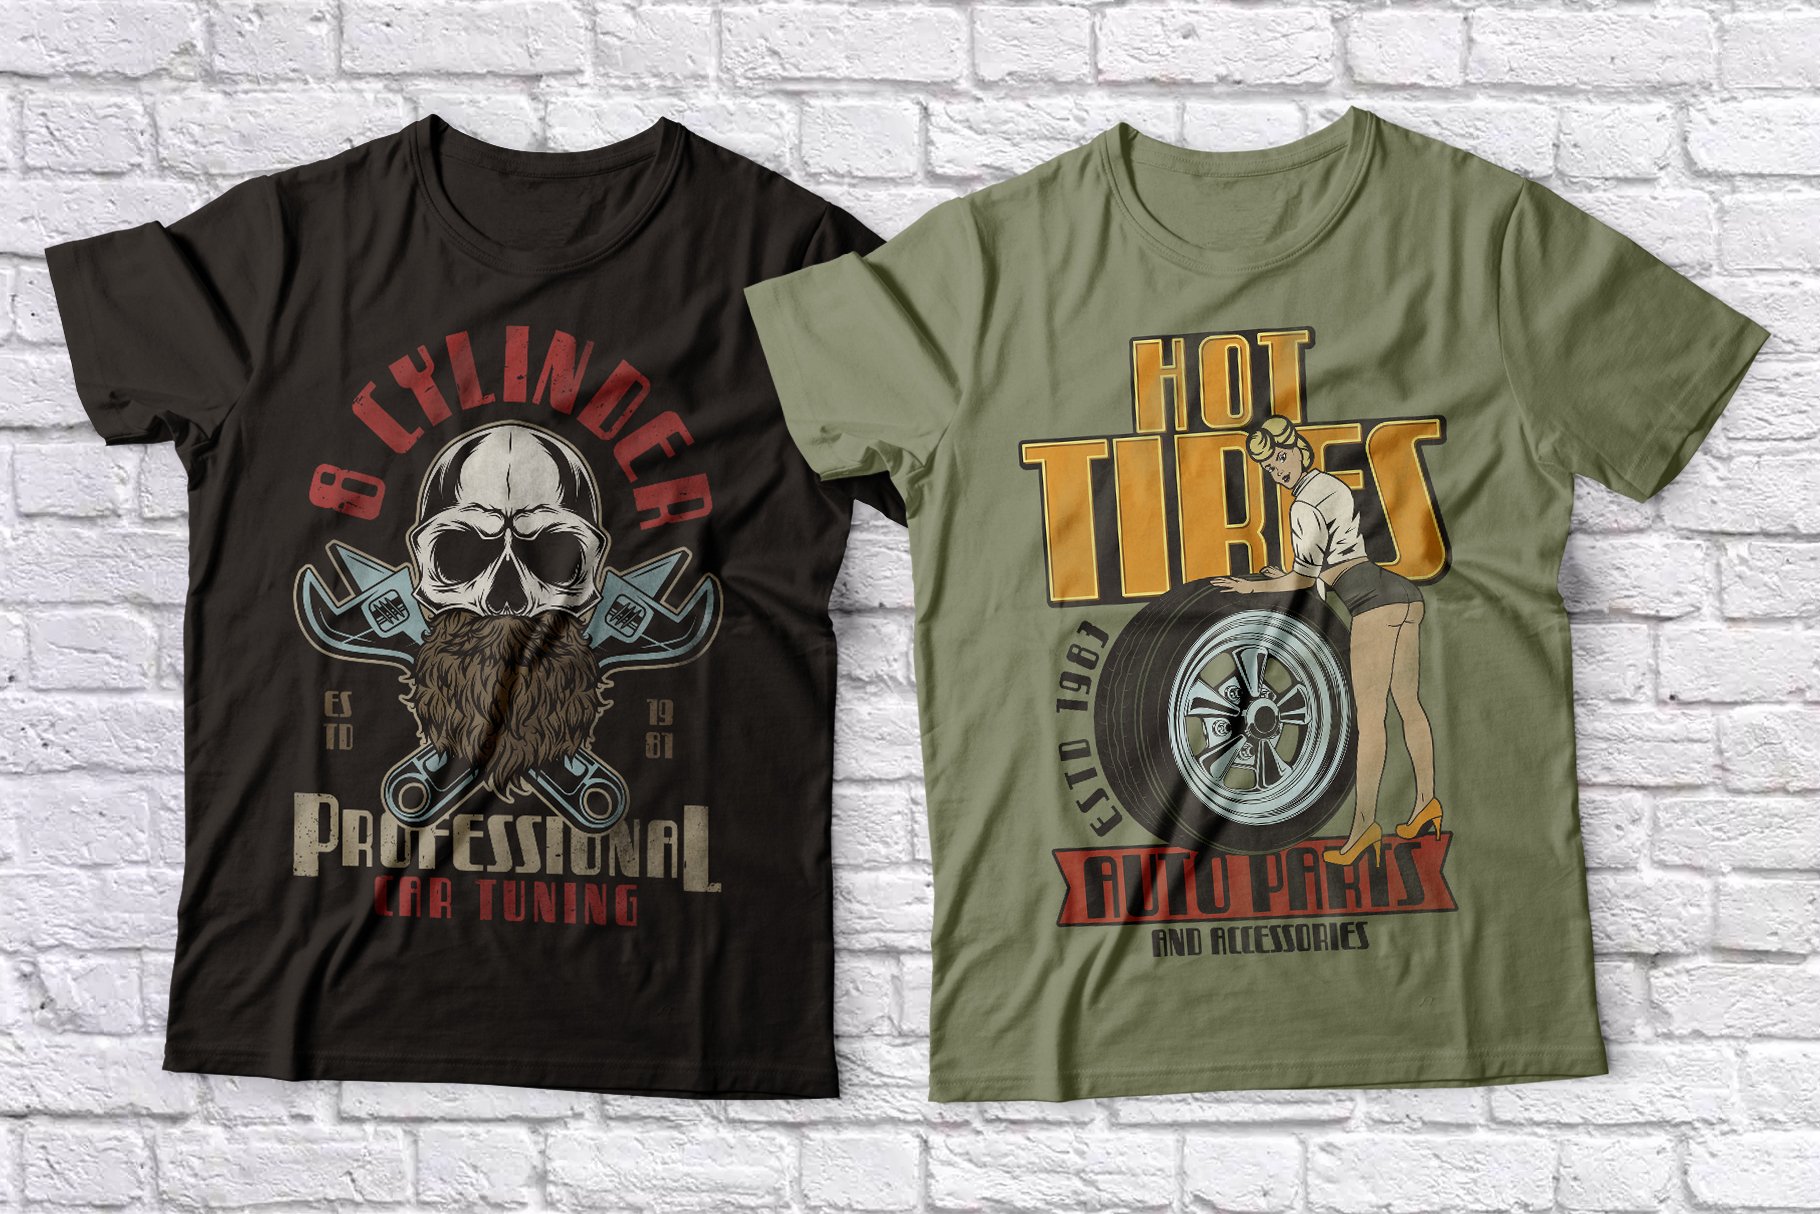 Two t-shirts with skulls.